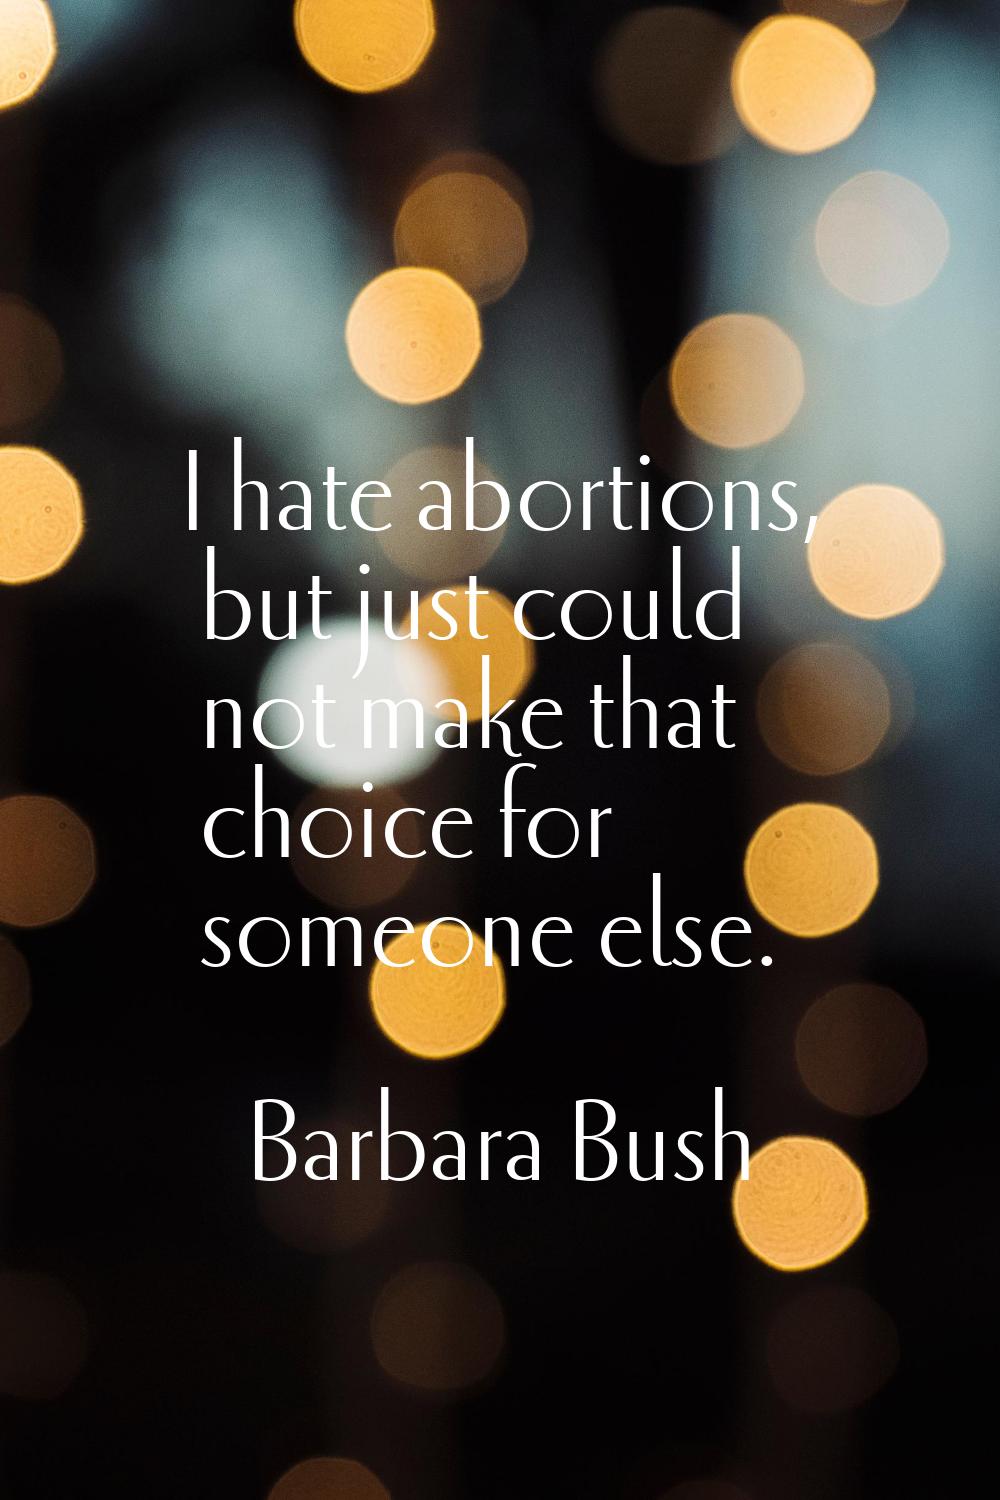 I hate abortions, but just could not make that choice for someone else.